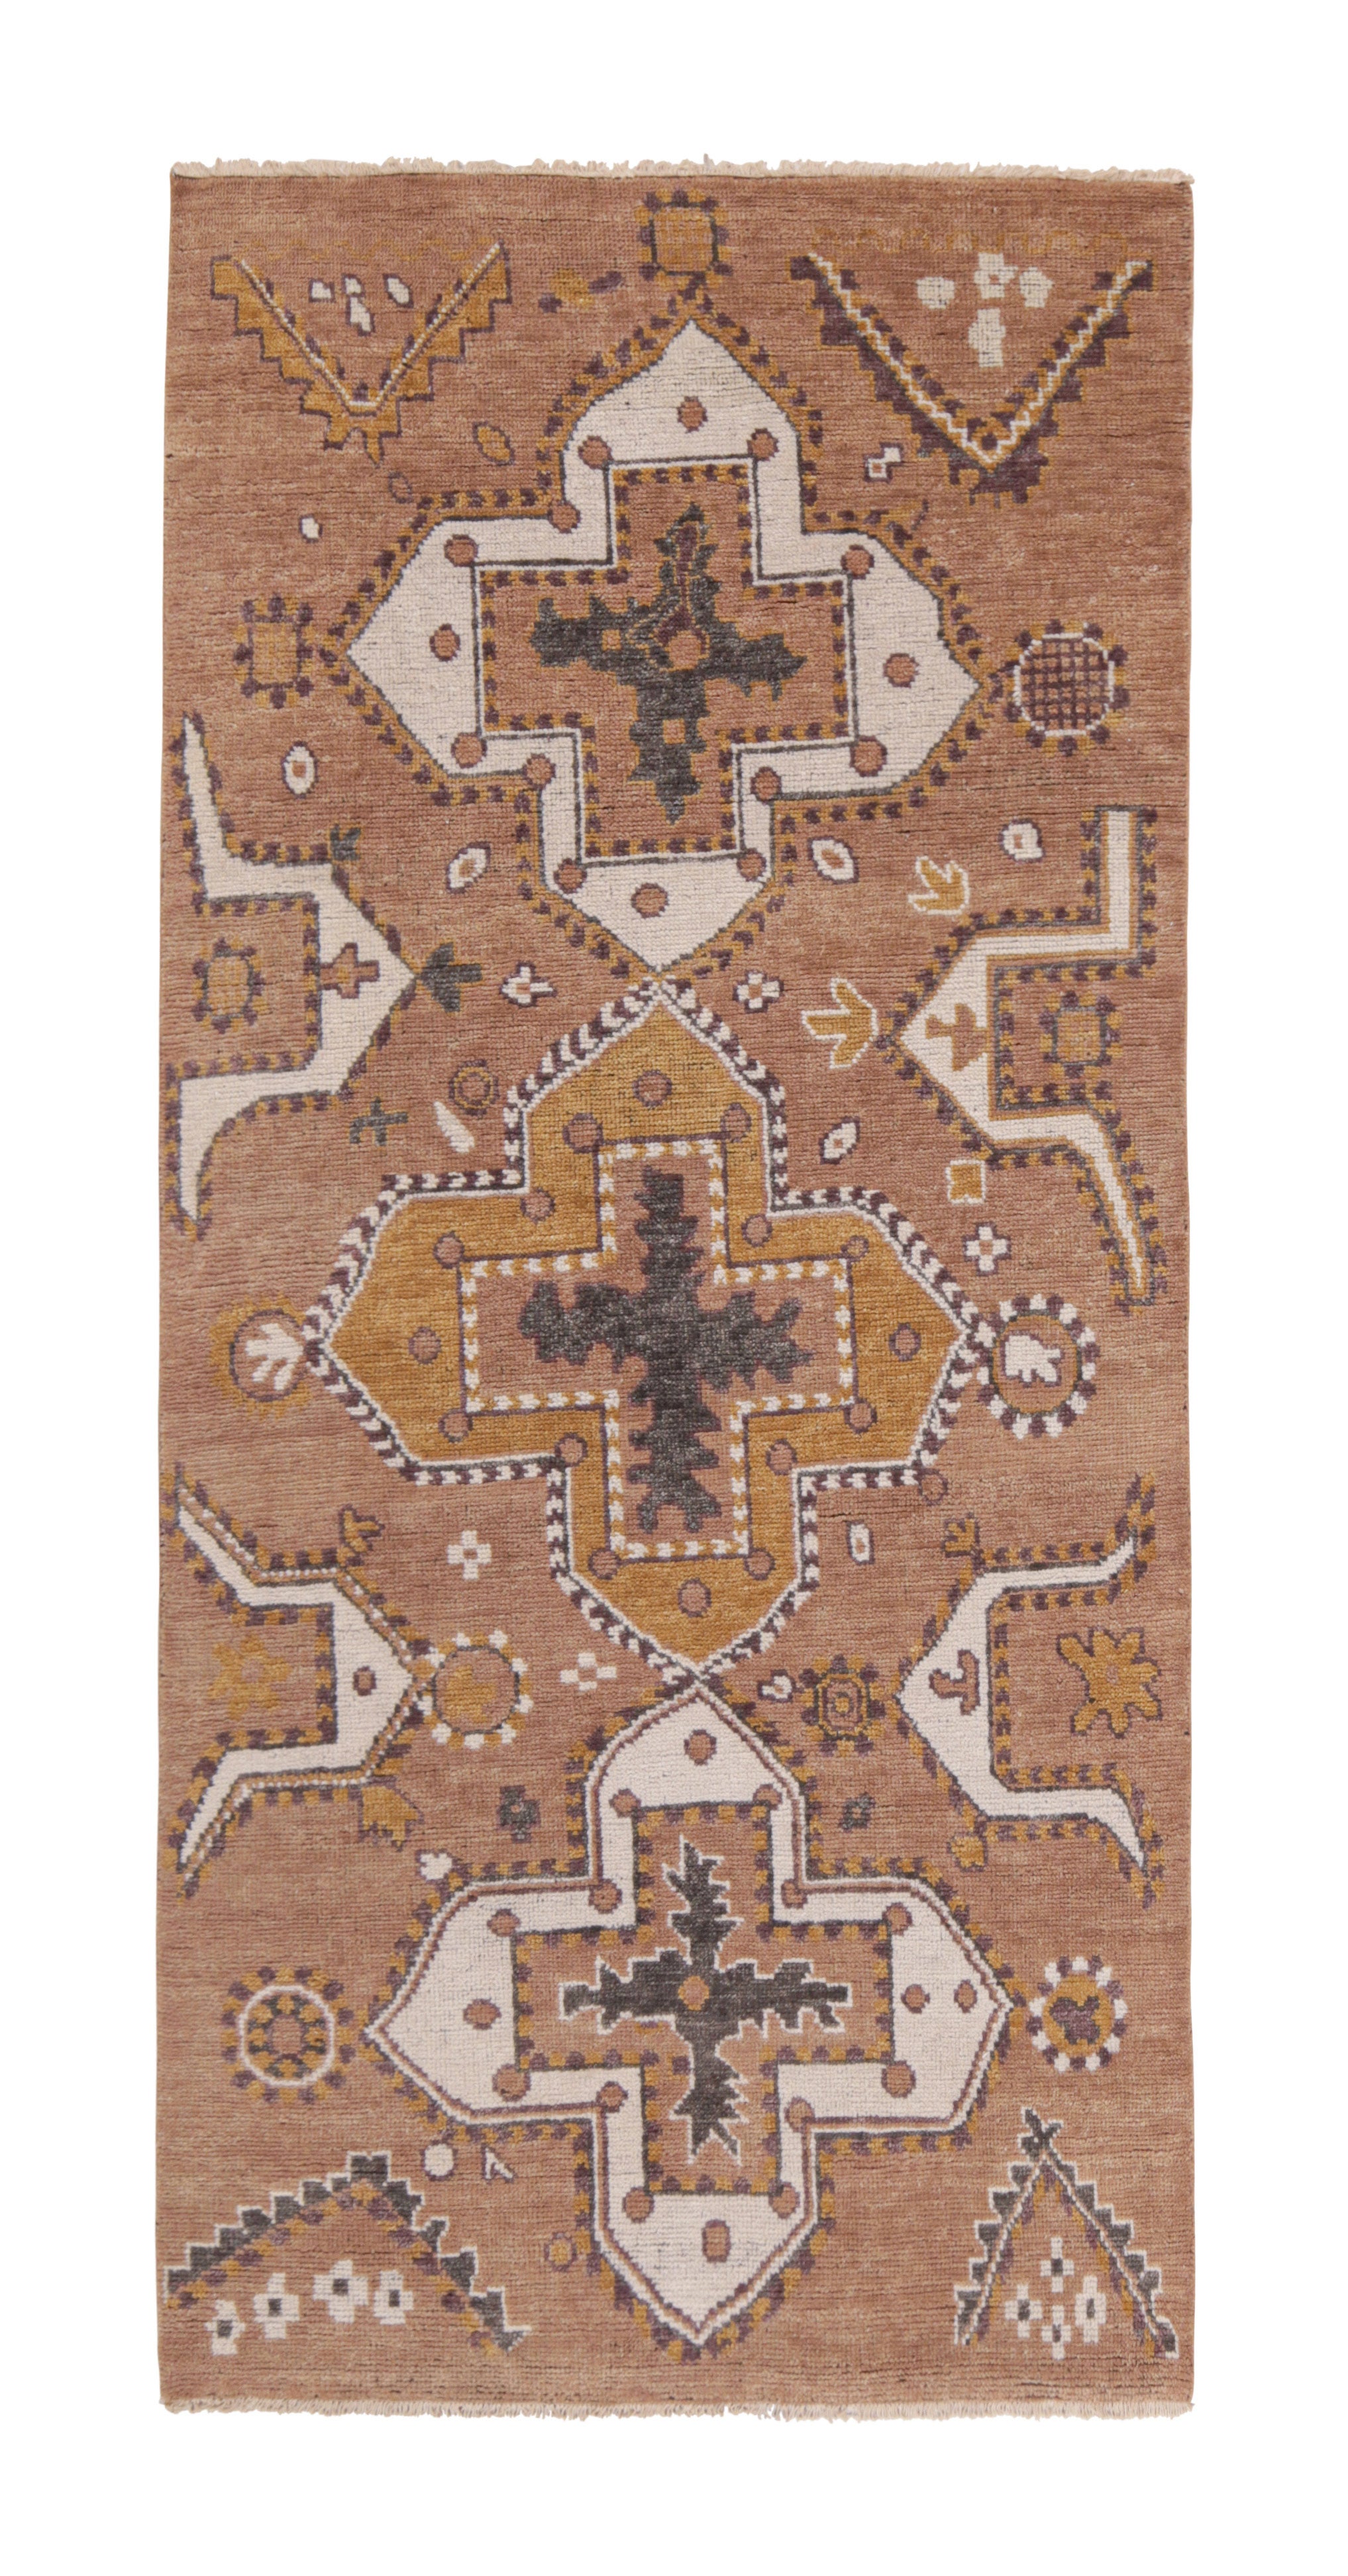 Rug & Kilim’s Tribal Style Rug in Rust with Gold and White Medallion Patterns